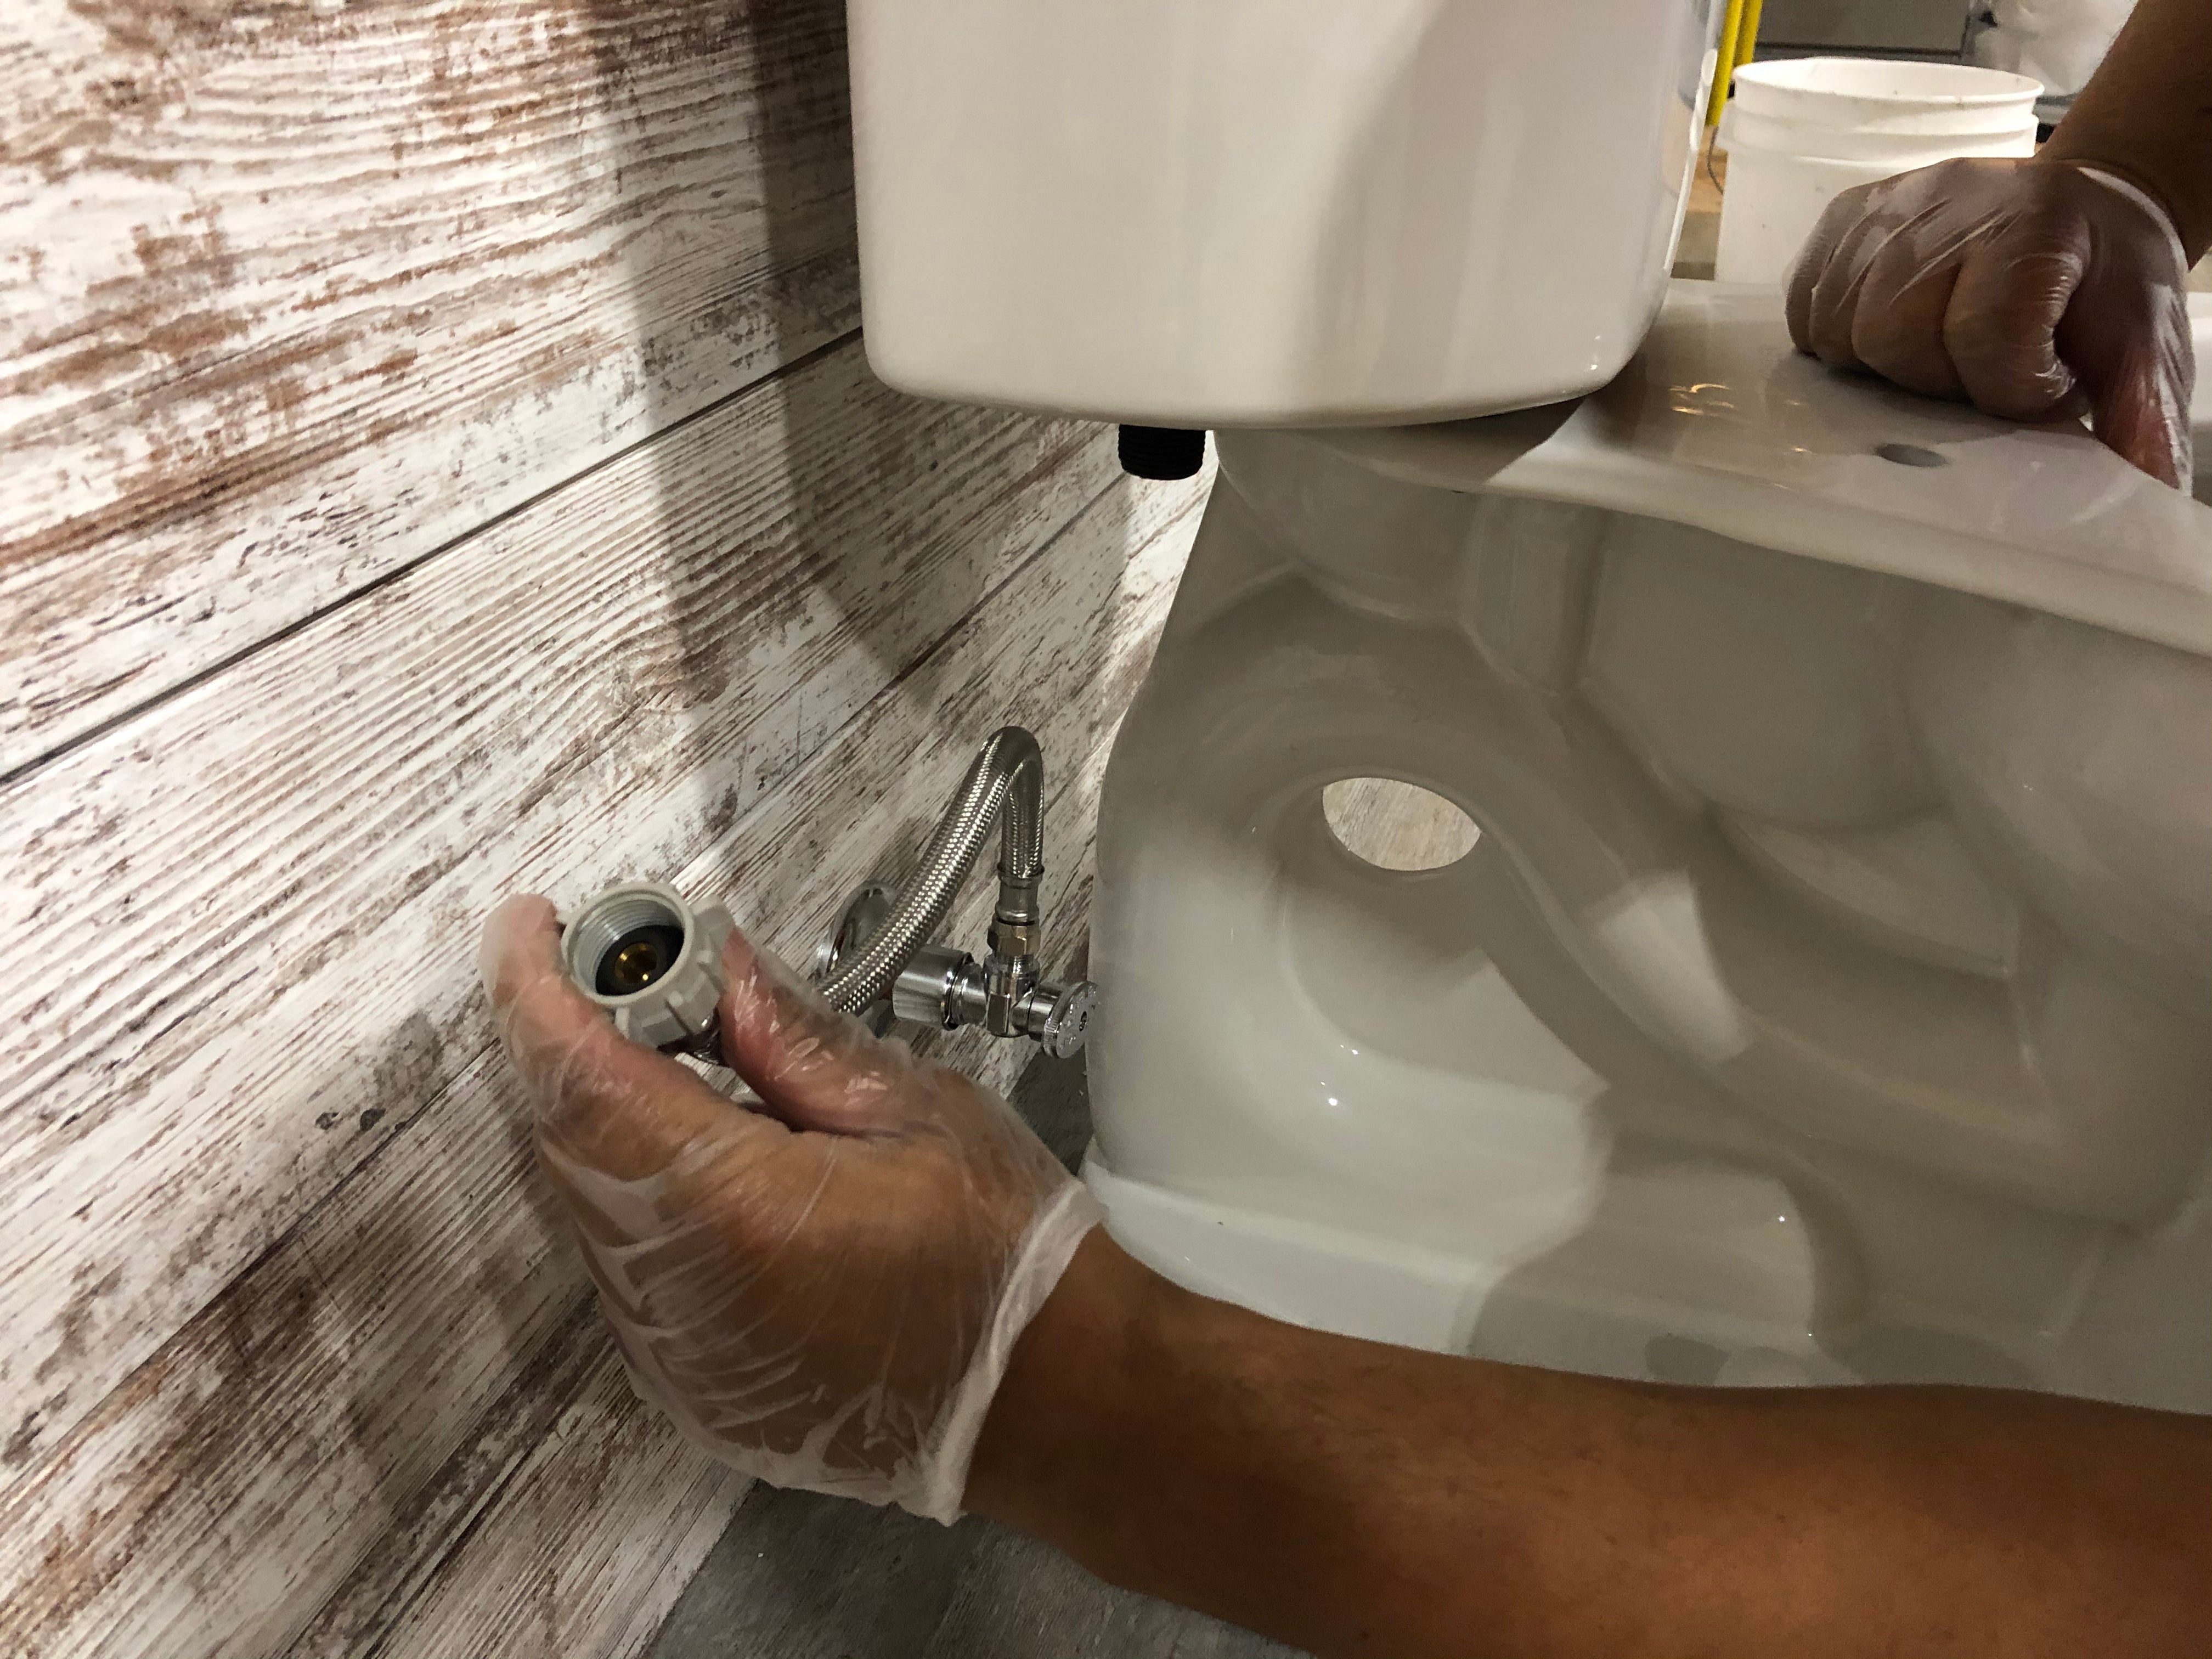 Victoria Plumbing Repair: When To Replace the Toilet Wax Ring